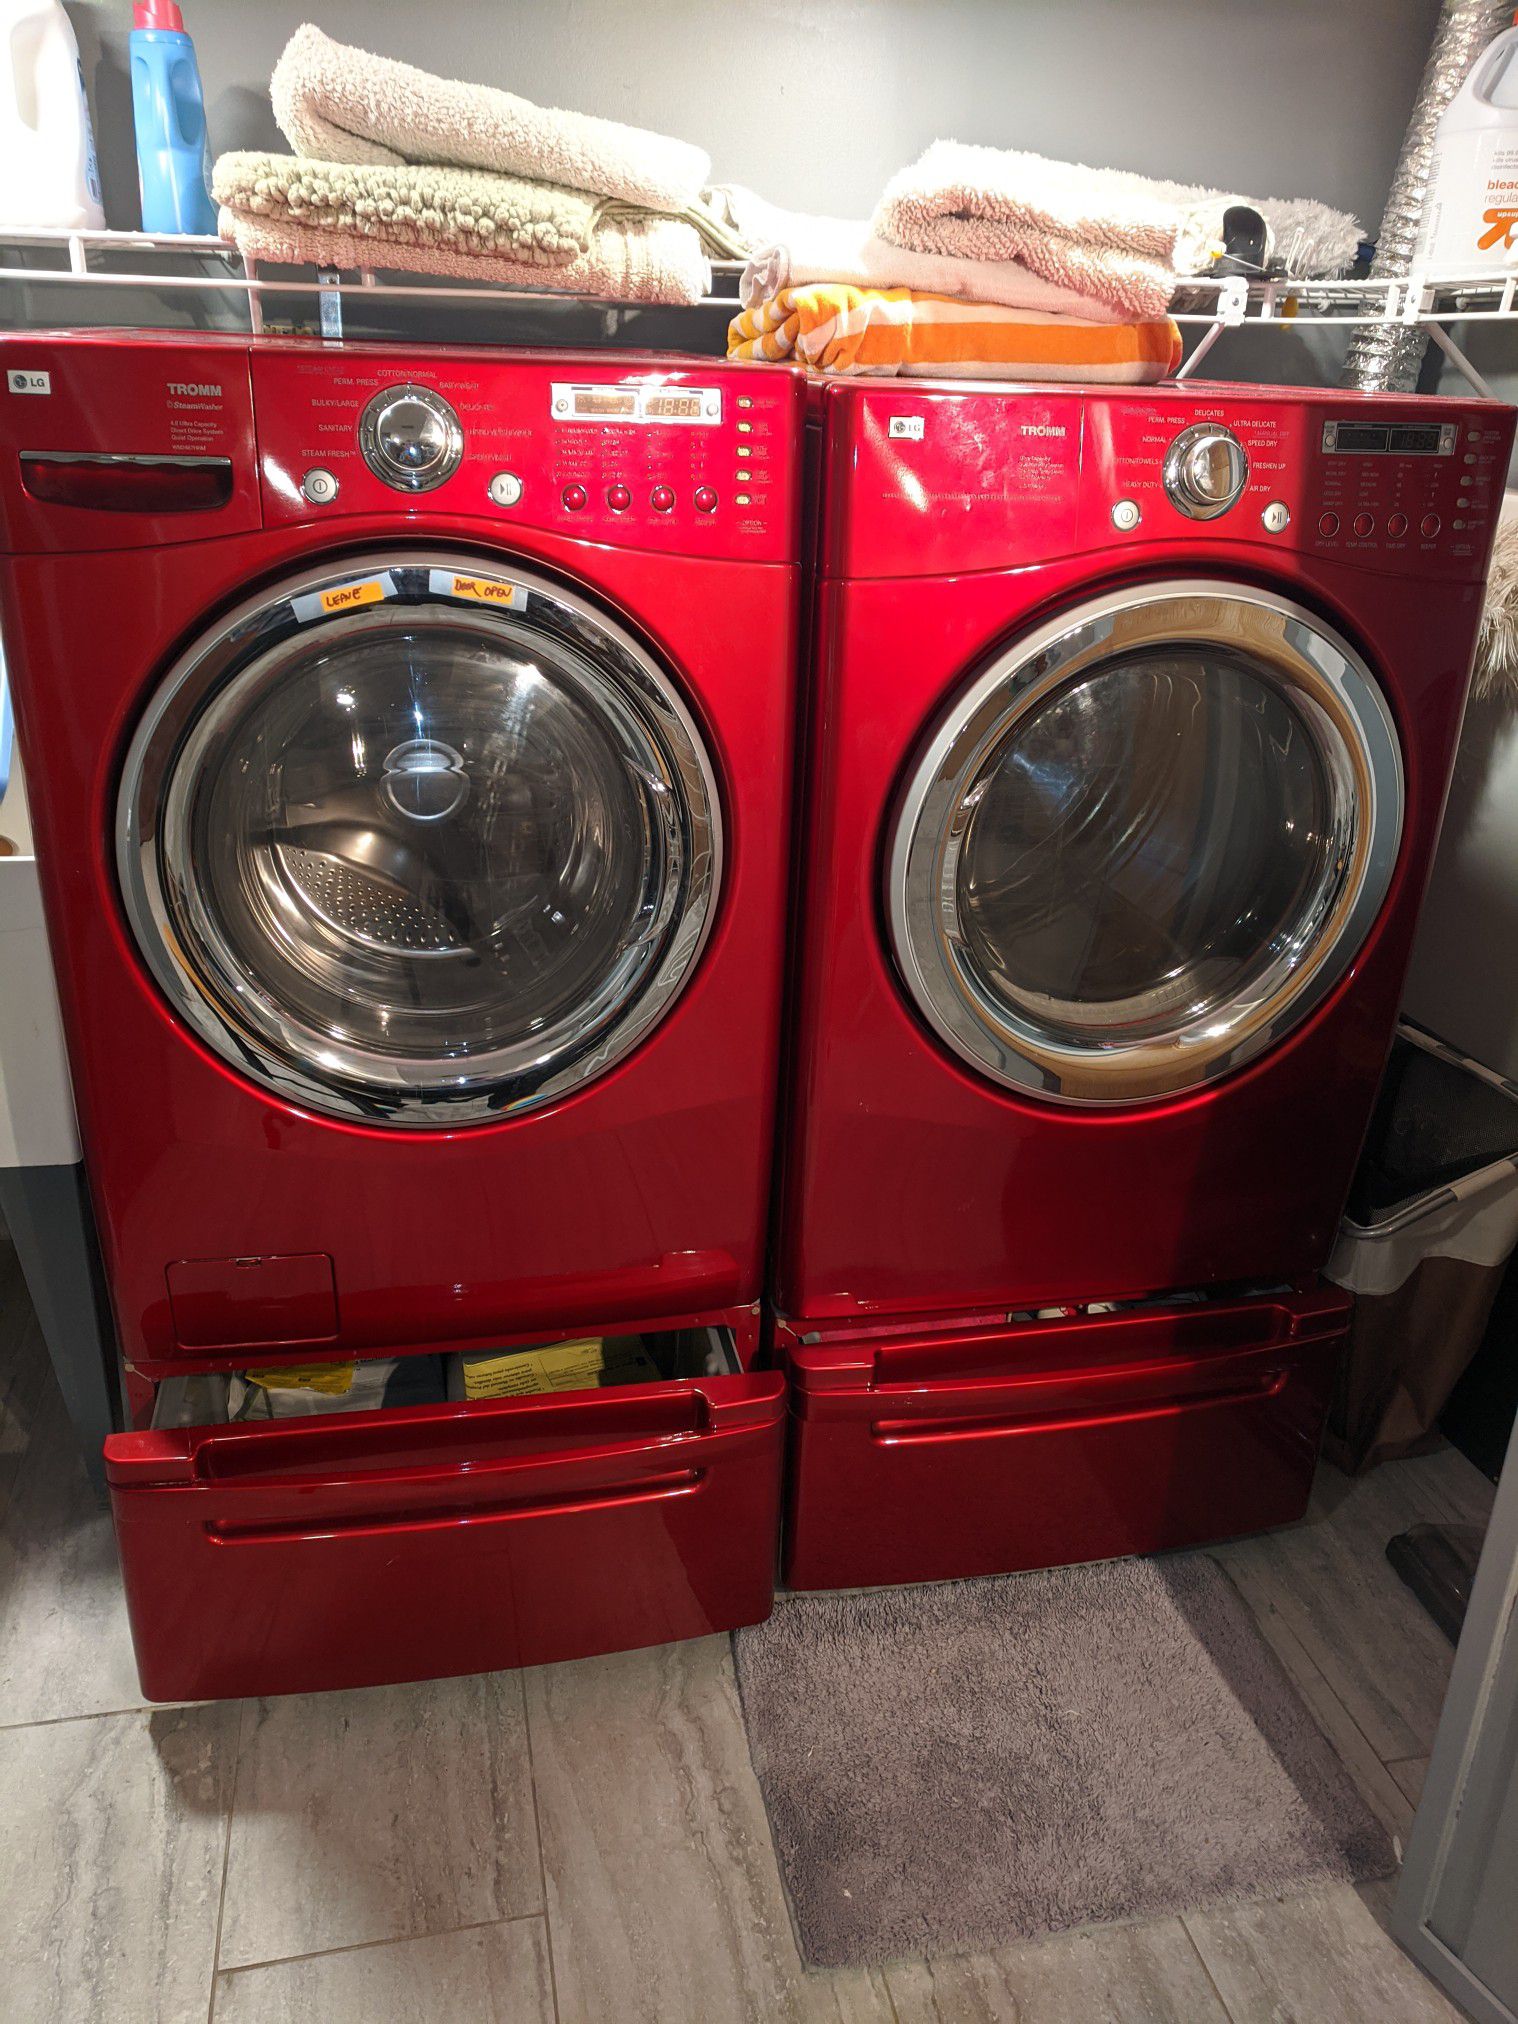 LG Tromm Steam Washer & Dryer. Top of the line